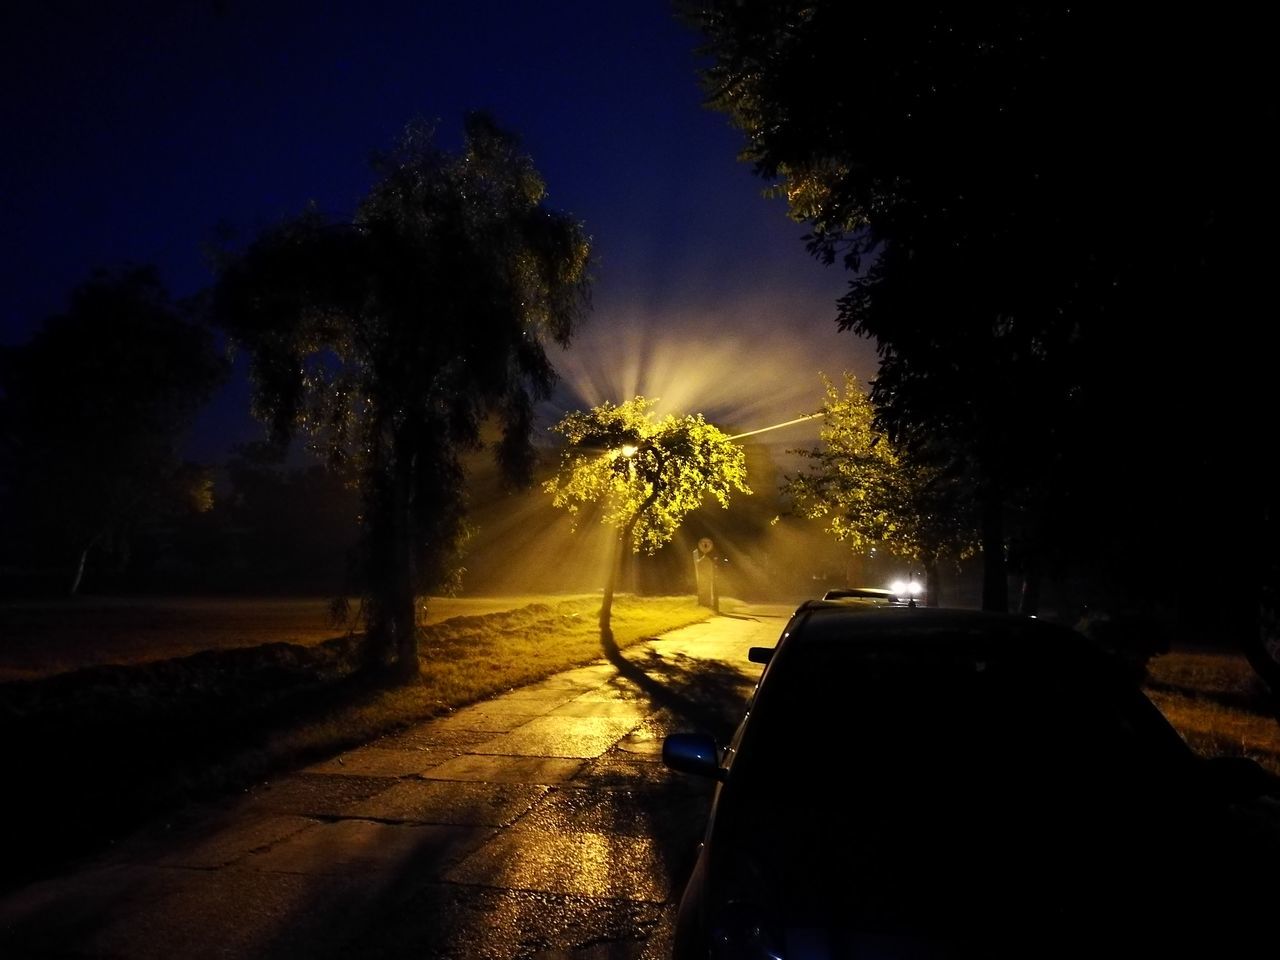 tree, night, silhouette, sky, illuminated, road, growth, dark, tranquility, nature, the way forward, outdoors, street, sunlight, transportation, dusk, no people, tranquil scene, shadow, landscape